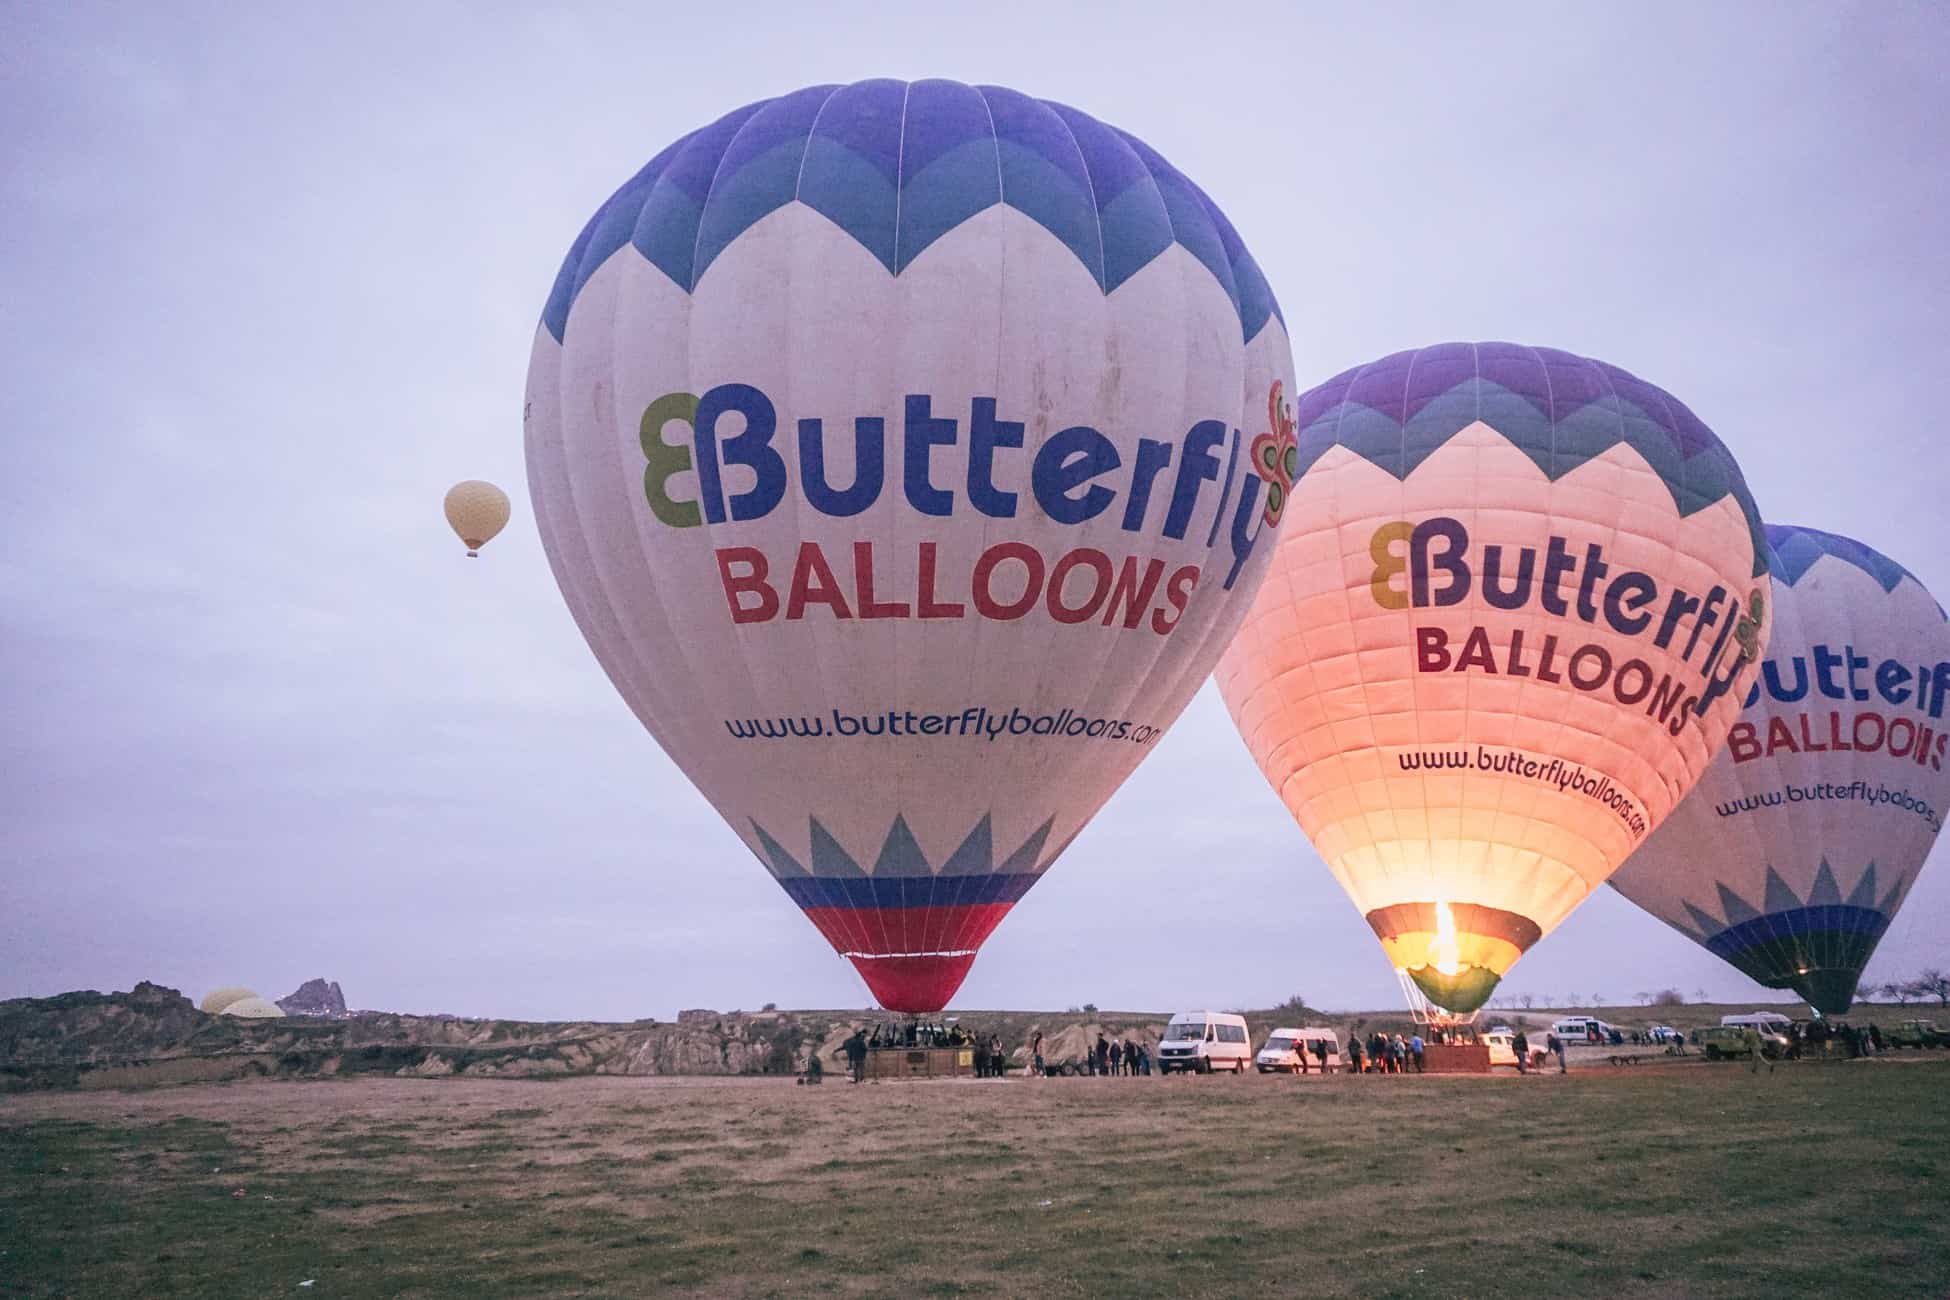 A guide to flying in a hot air balloon in Cappadocia: all you need to know